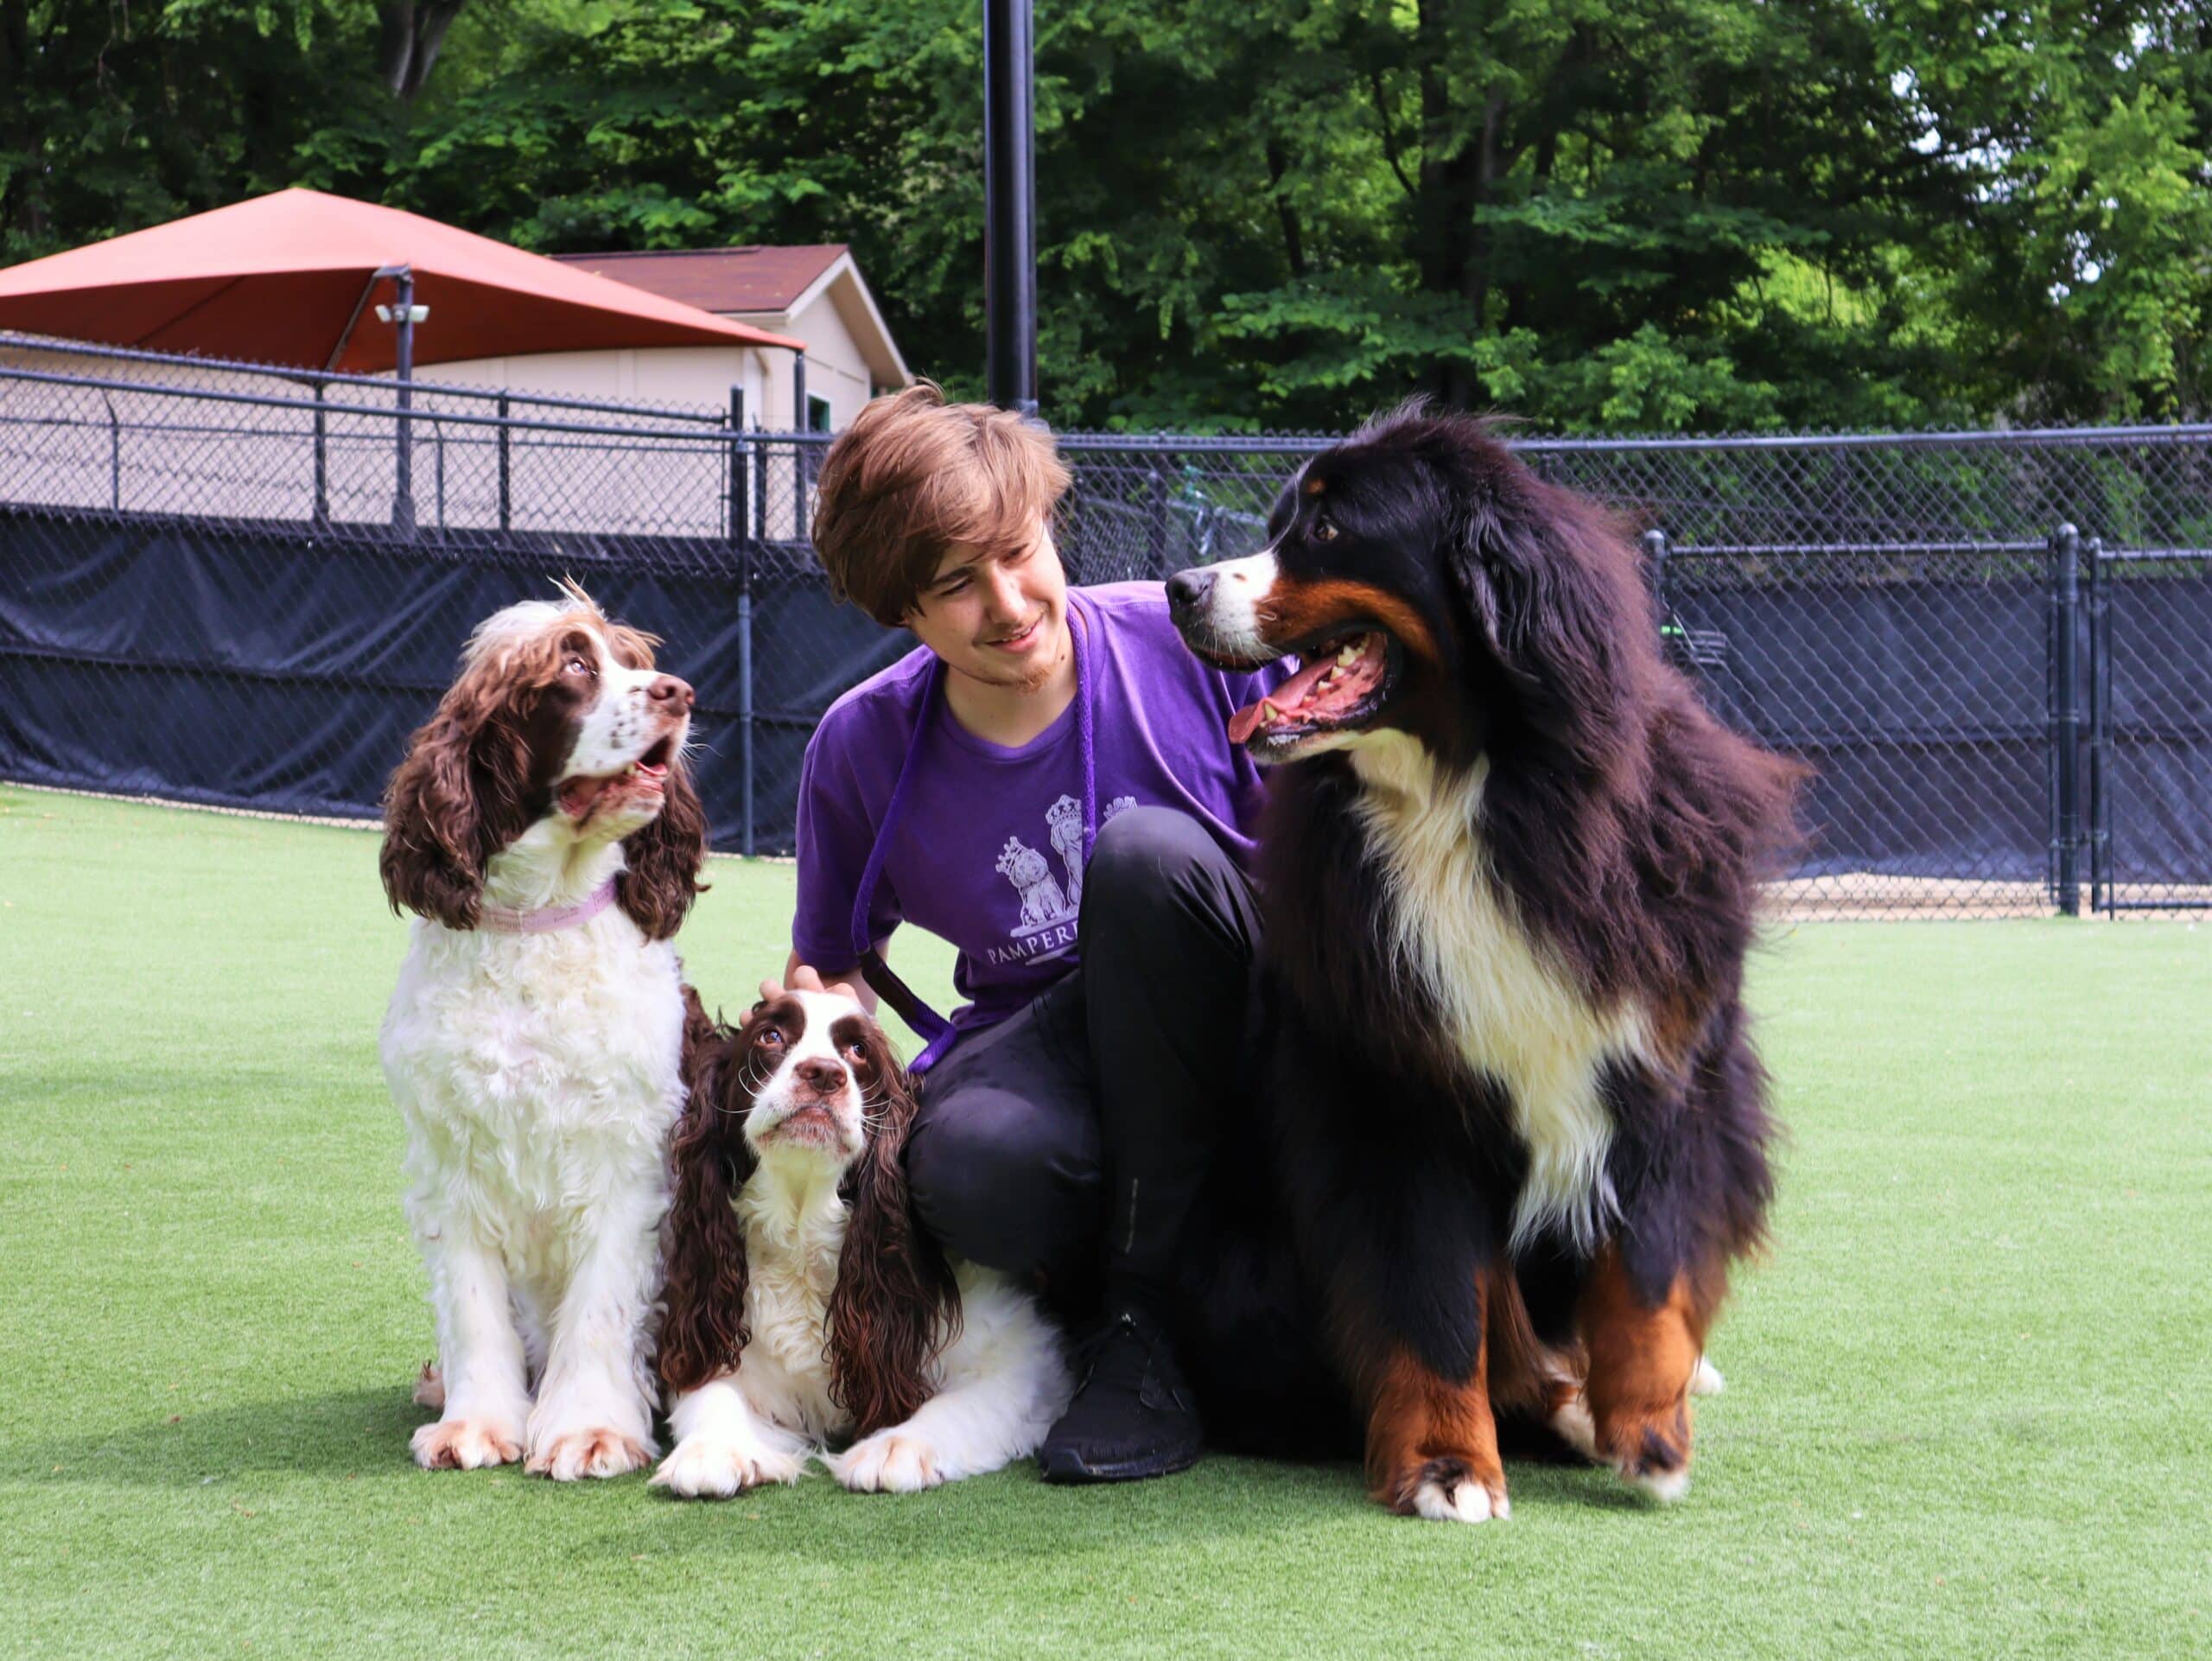 Pet Handler kneeling with three dogs in a play group.